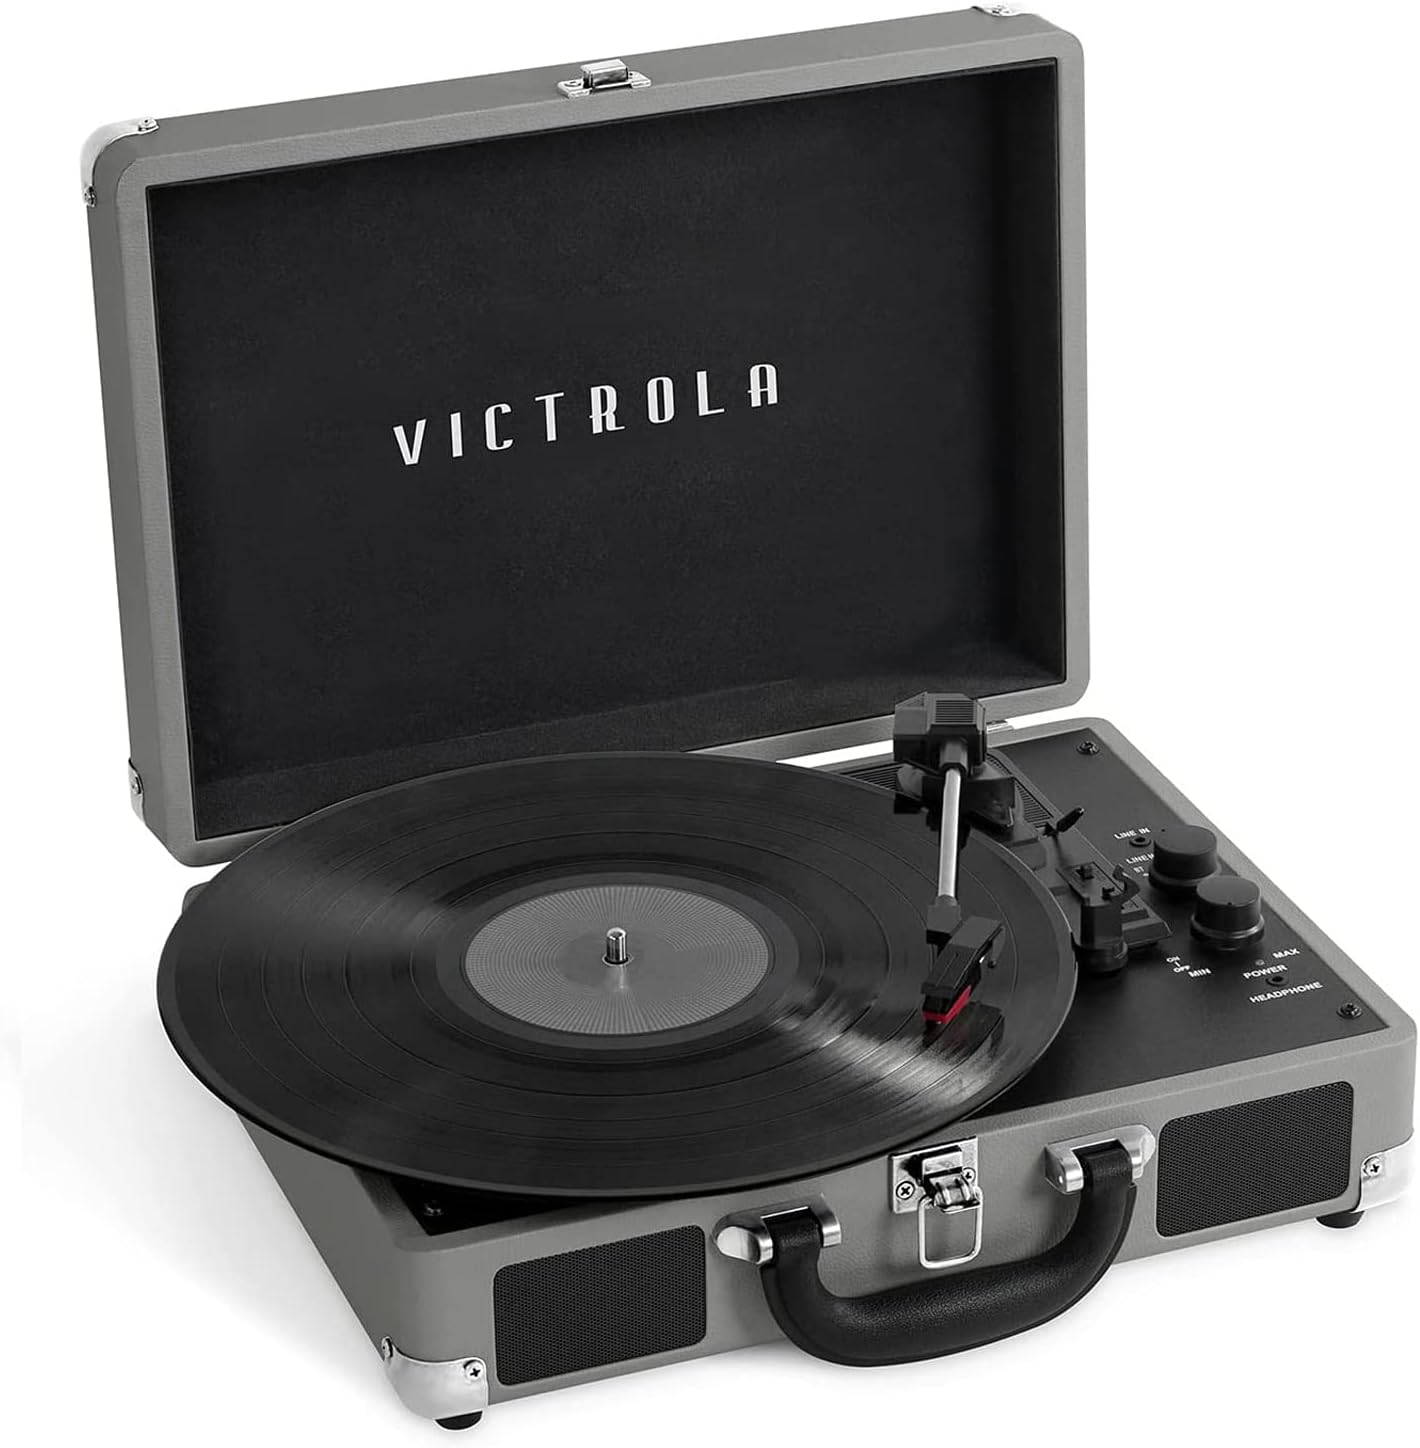 Victrola Vintage 3-Speed Bluetooth Portable Suitcase Record Player with Built-in Speakers | Upgraded Turntable Audio Sound|Brown, Model Number: VSC-550BT-BRW